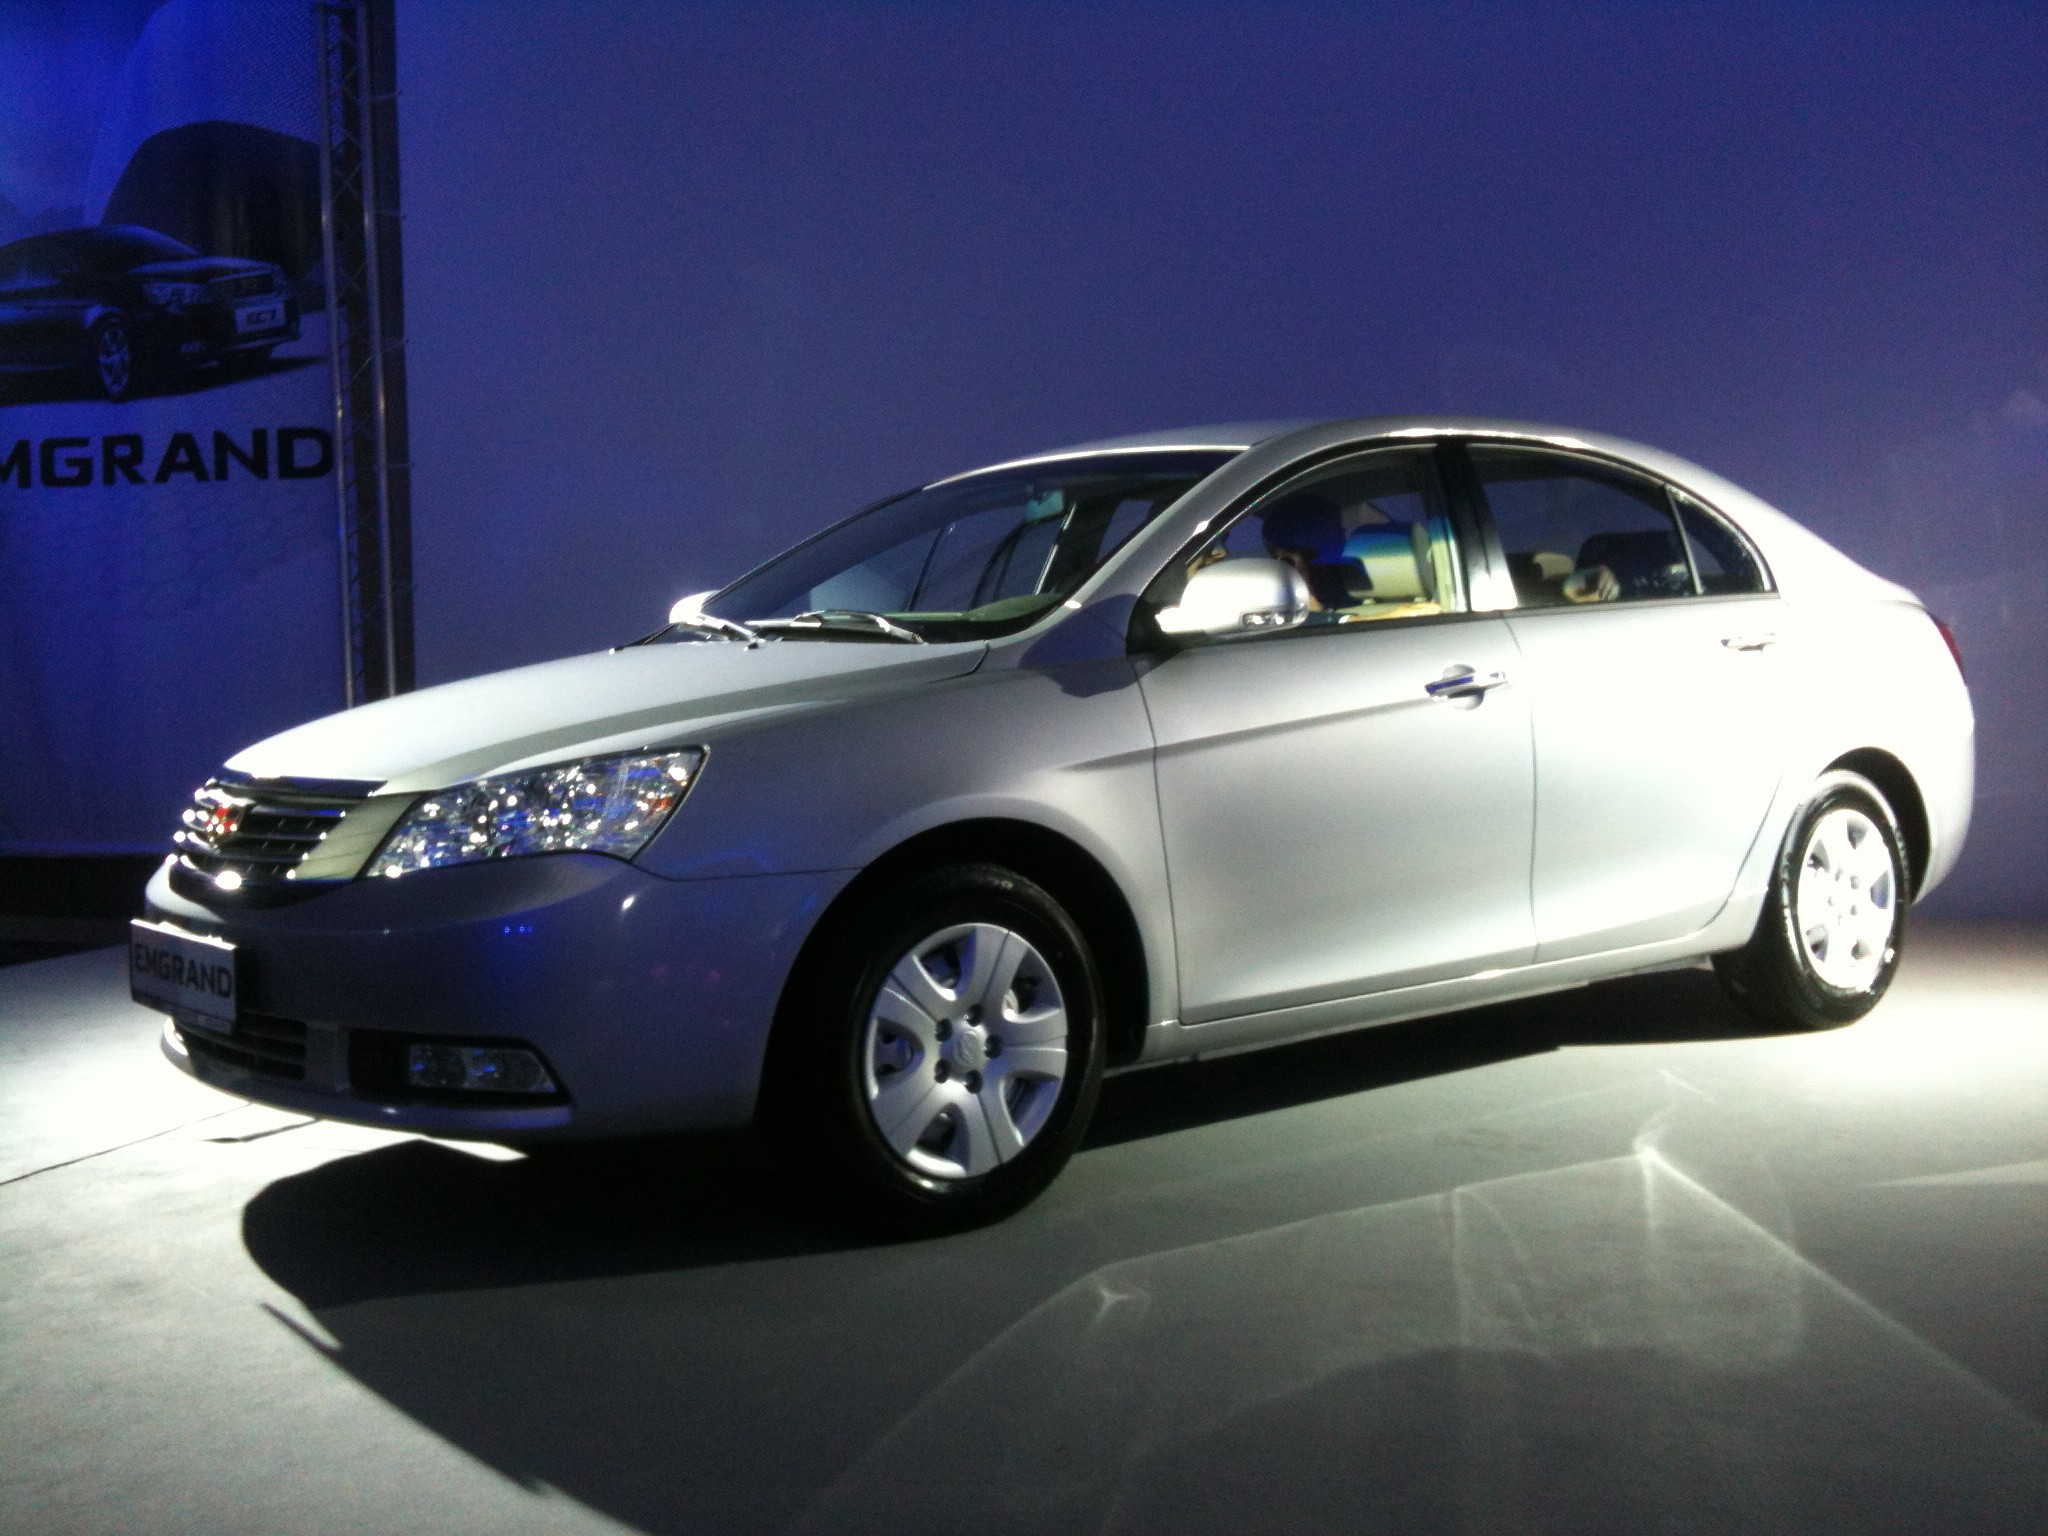 Jelly 7. Geely Emgrand ec7. Gelly e. Geely Emgrand 7. Geely Emgrand ec7 седан.